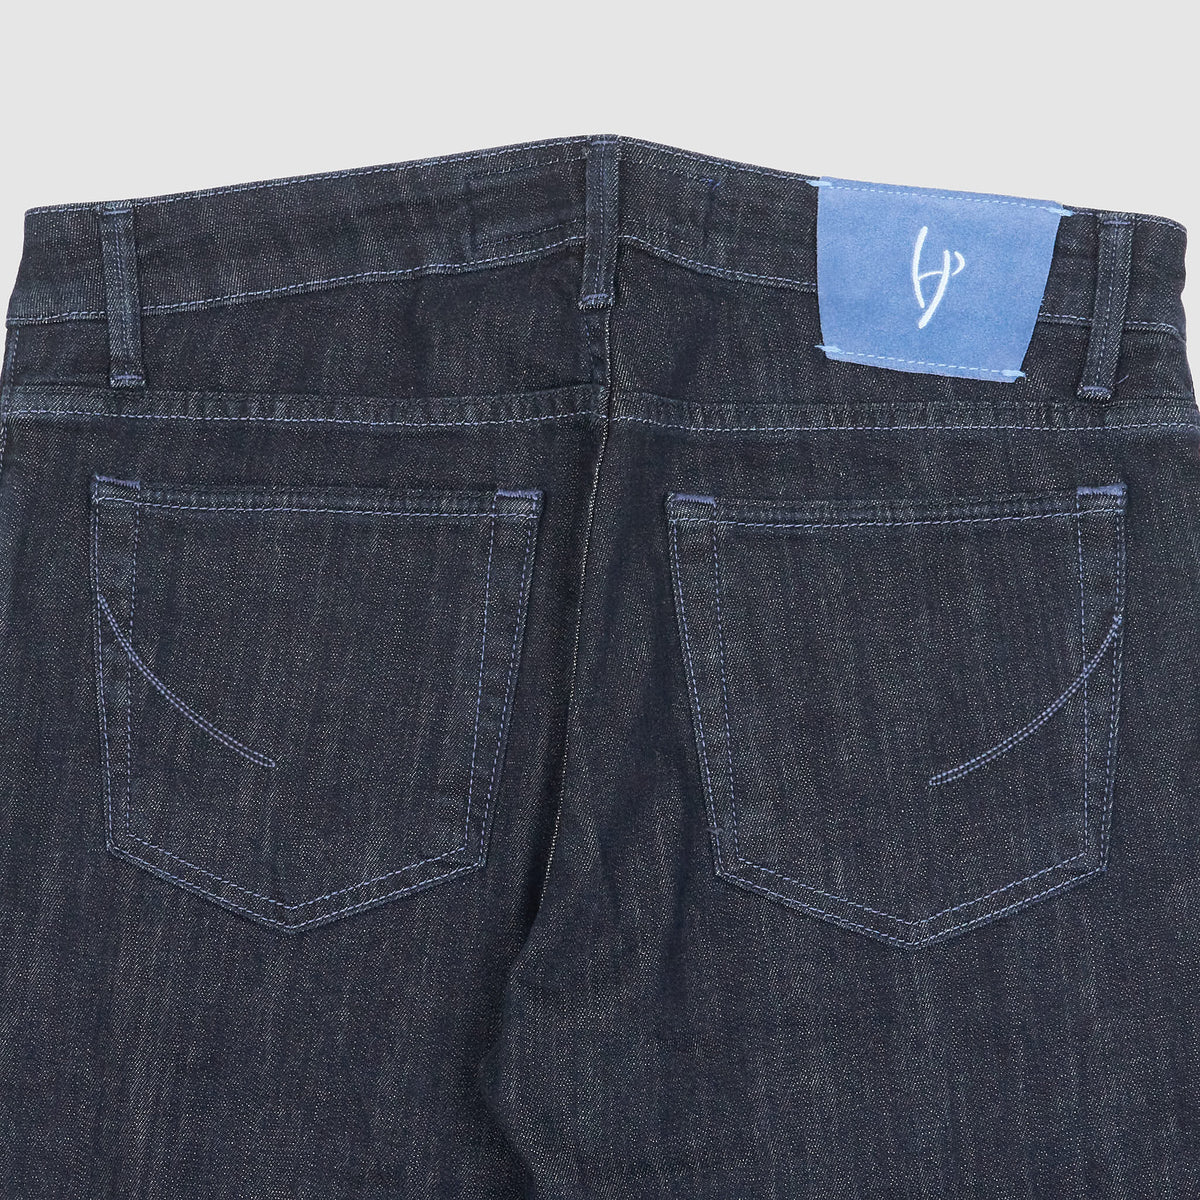 Handpicked 5-Pocket Slim Fitted Jeans